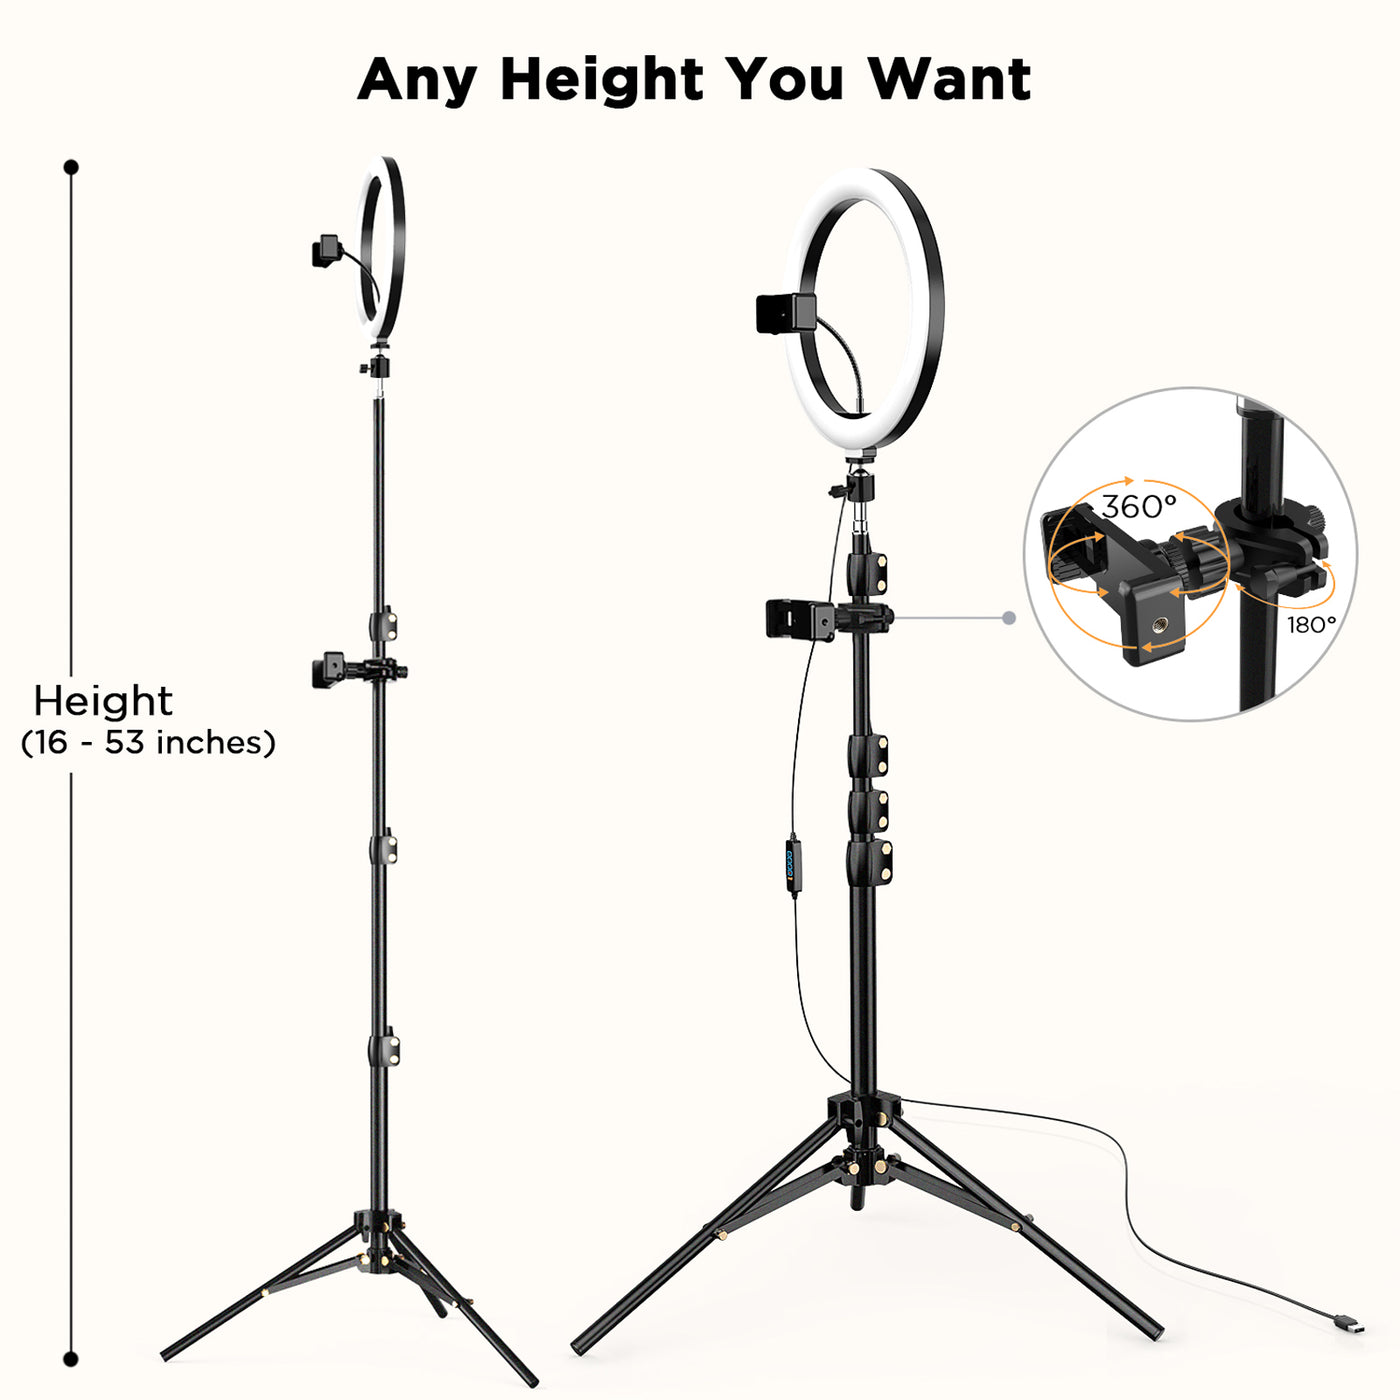 LETSCOM F-533 10.2" Selfie Ring Light with Tripod Stand & 2 Phone Holders